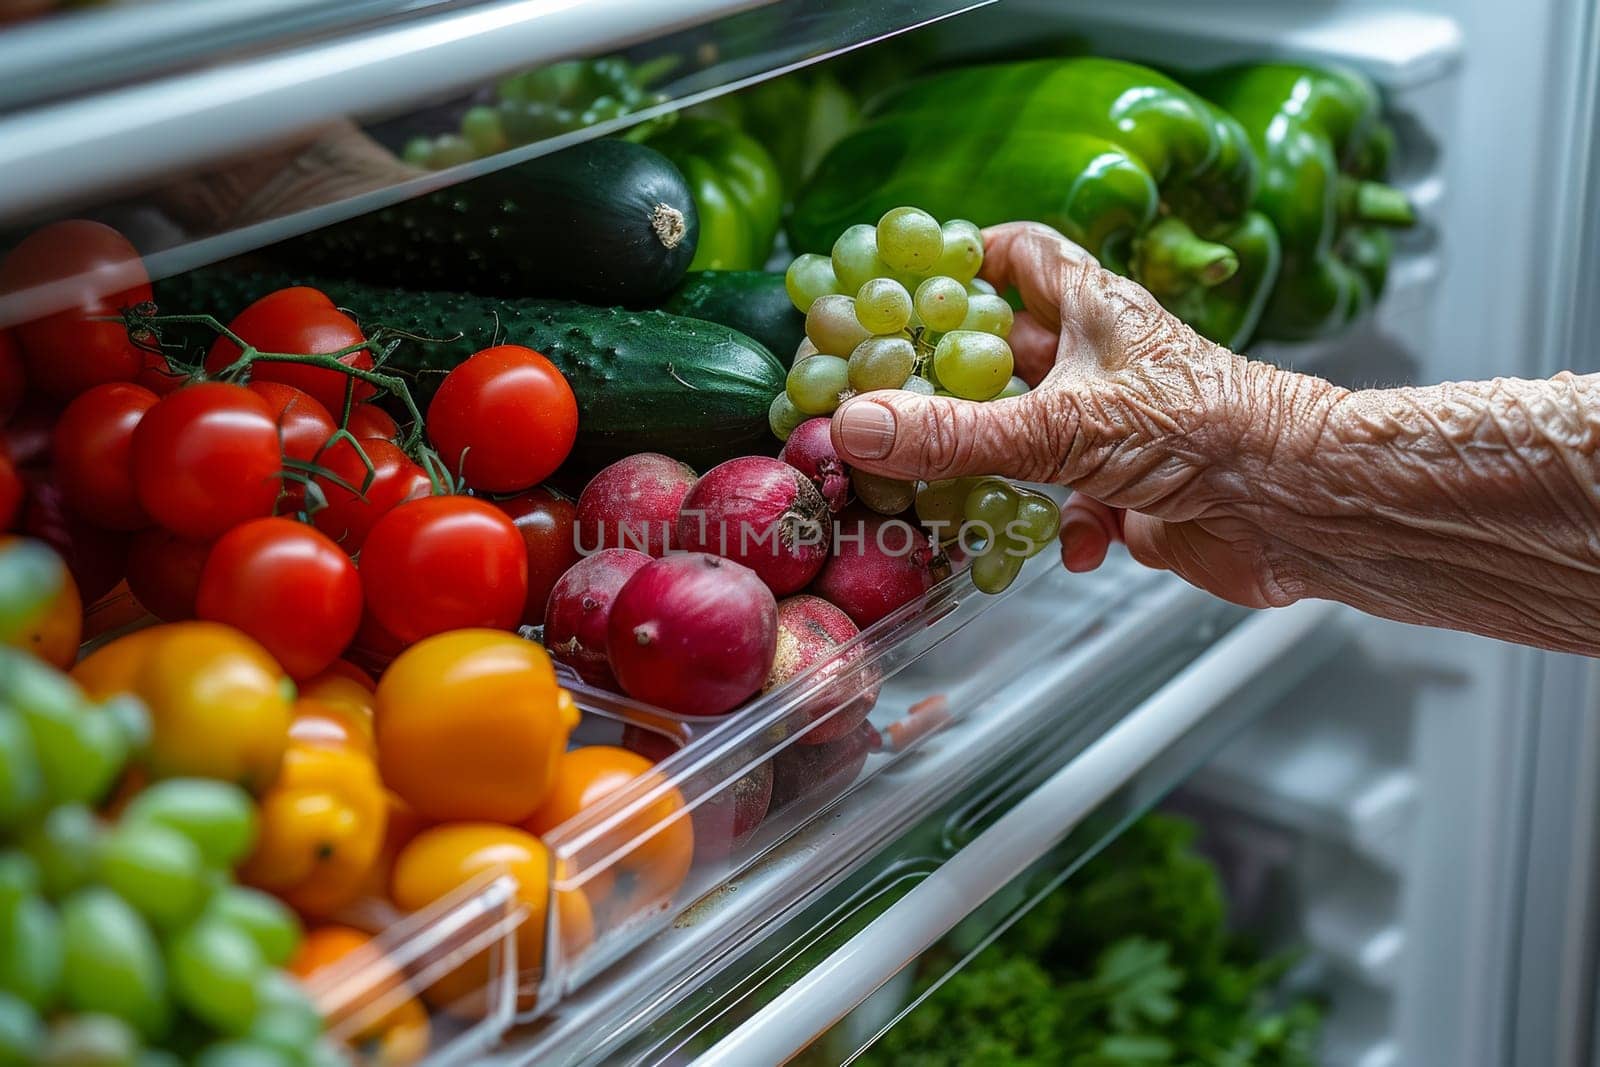 A woman reaching for a pepper in a refrigerator by itchaznong